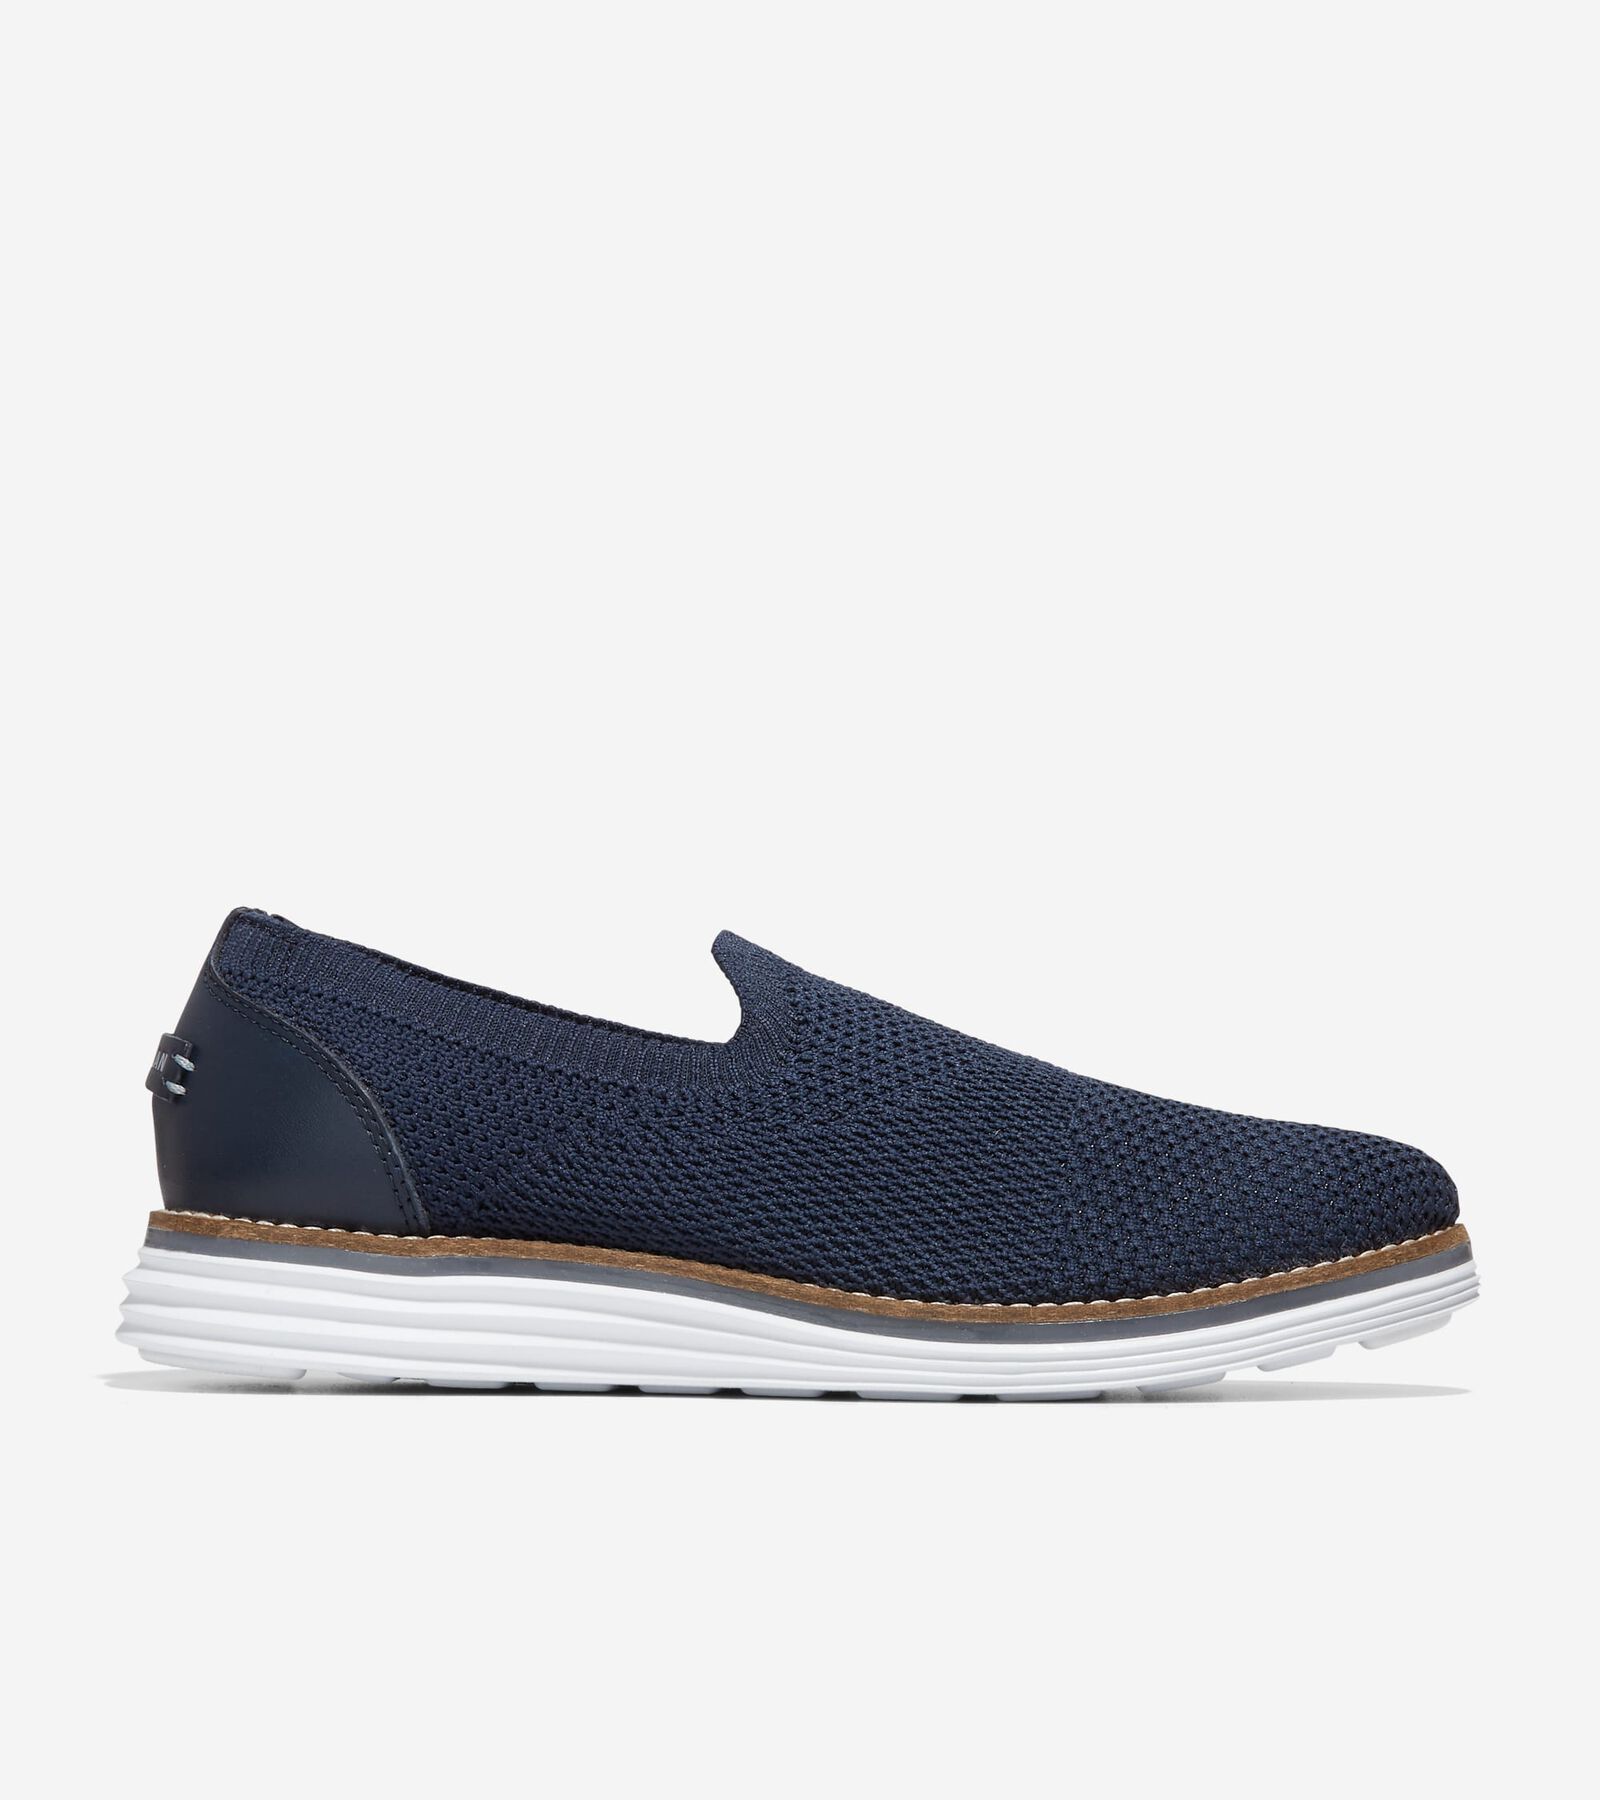 Cole Haan Original Grand Cloudfeel Meridian Loafer In Navy Knit-optic White